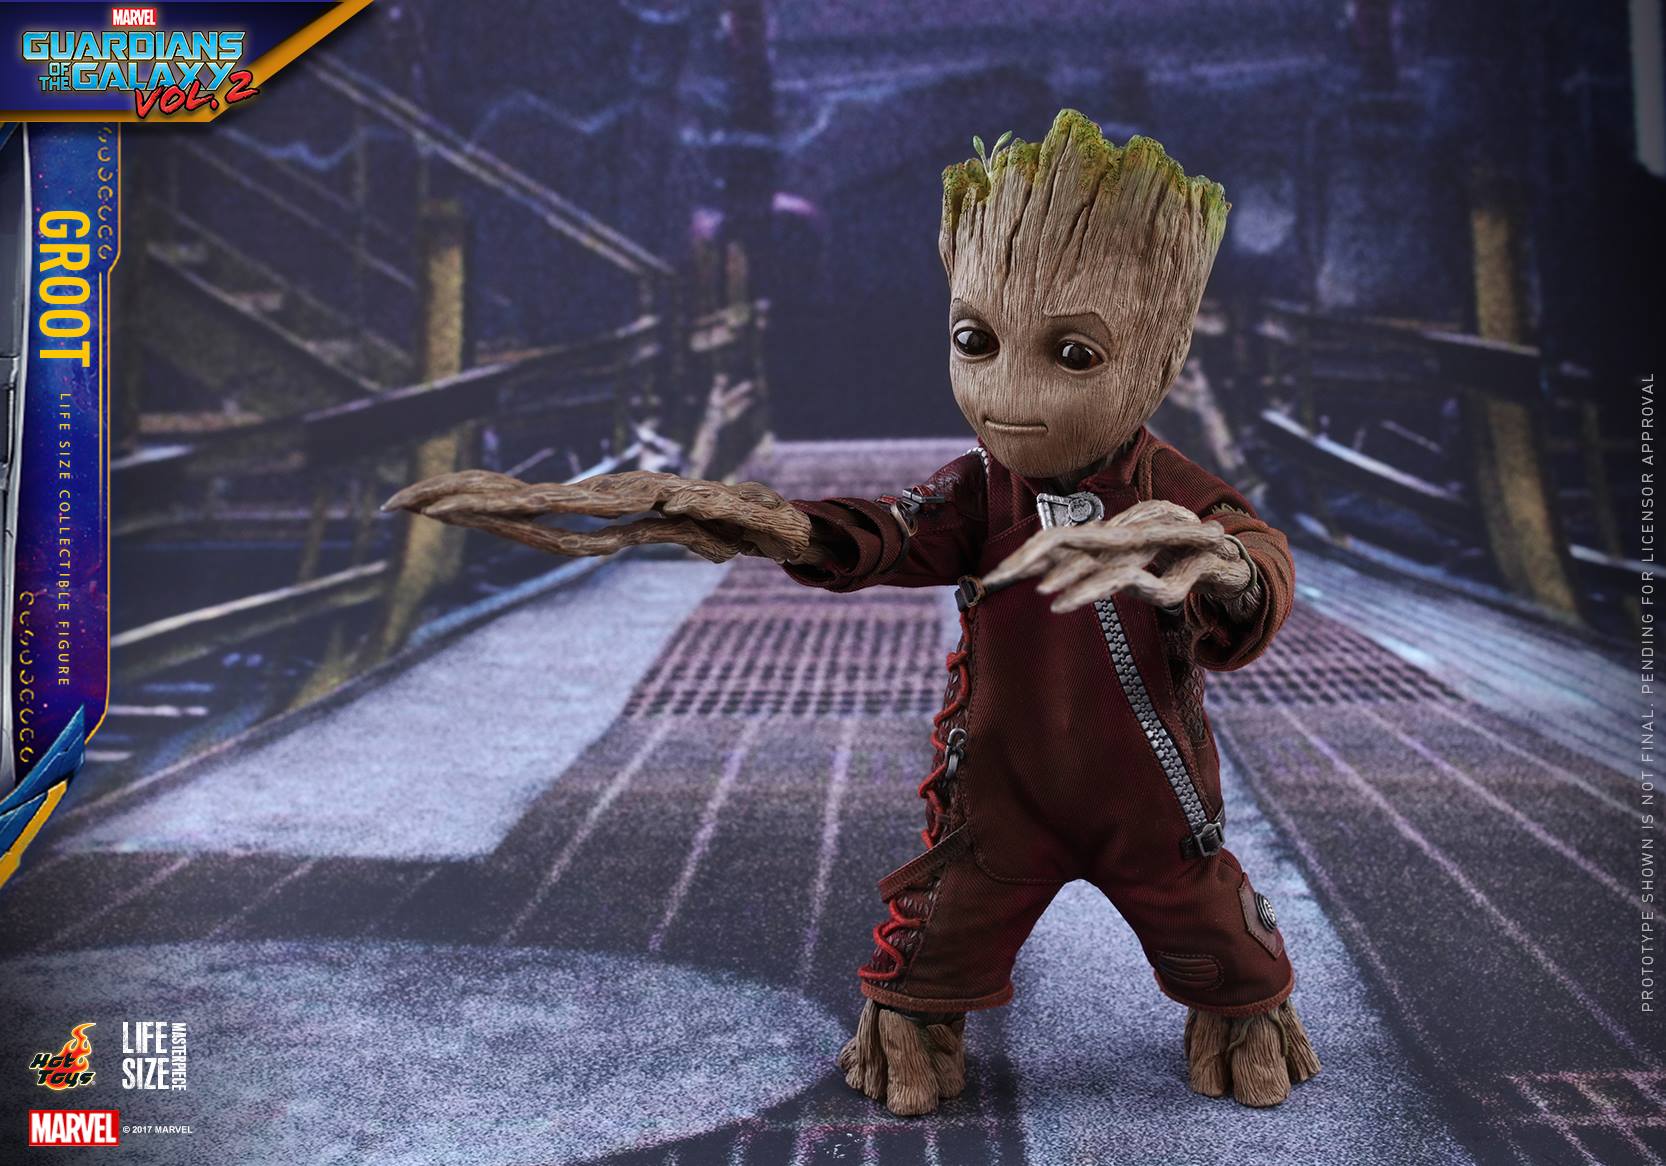 Hot-Toys-GotG-Vol-2-Life-Size-Baby-Groot-019.jpg